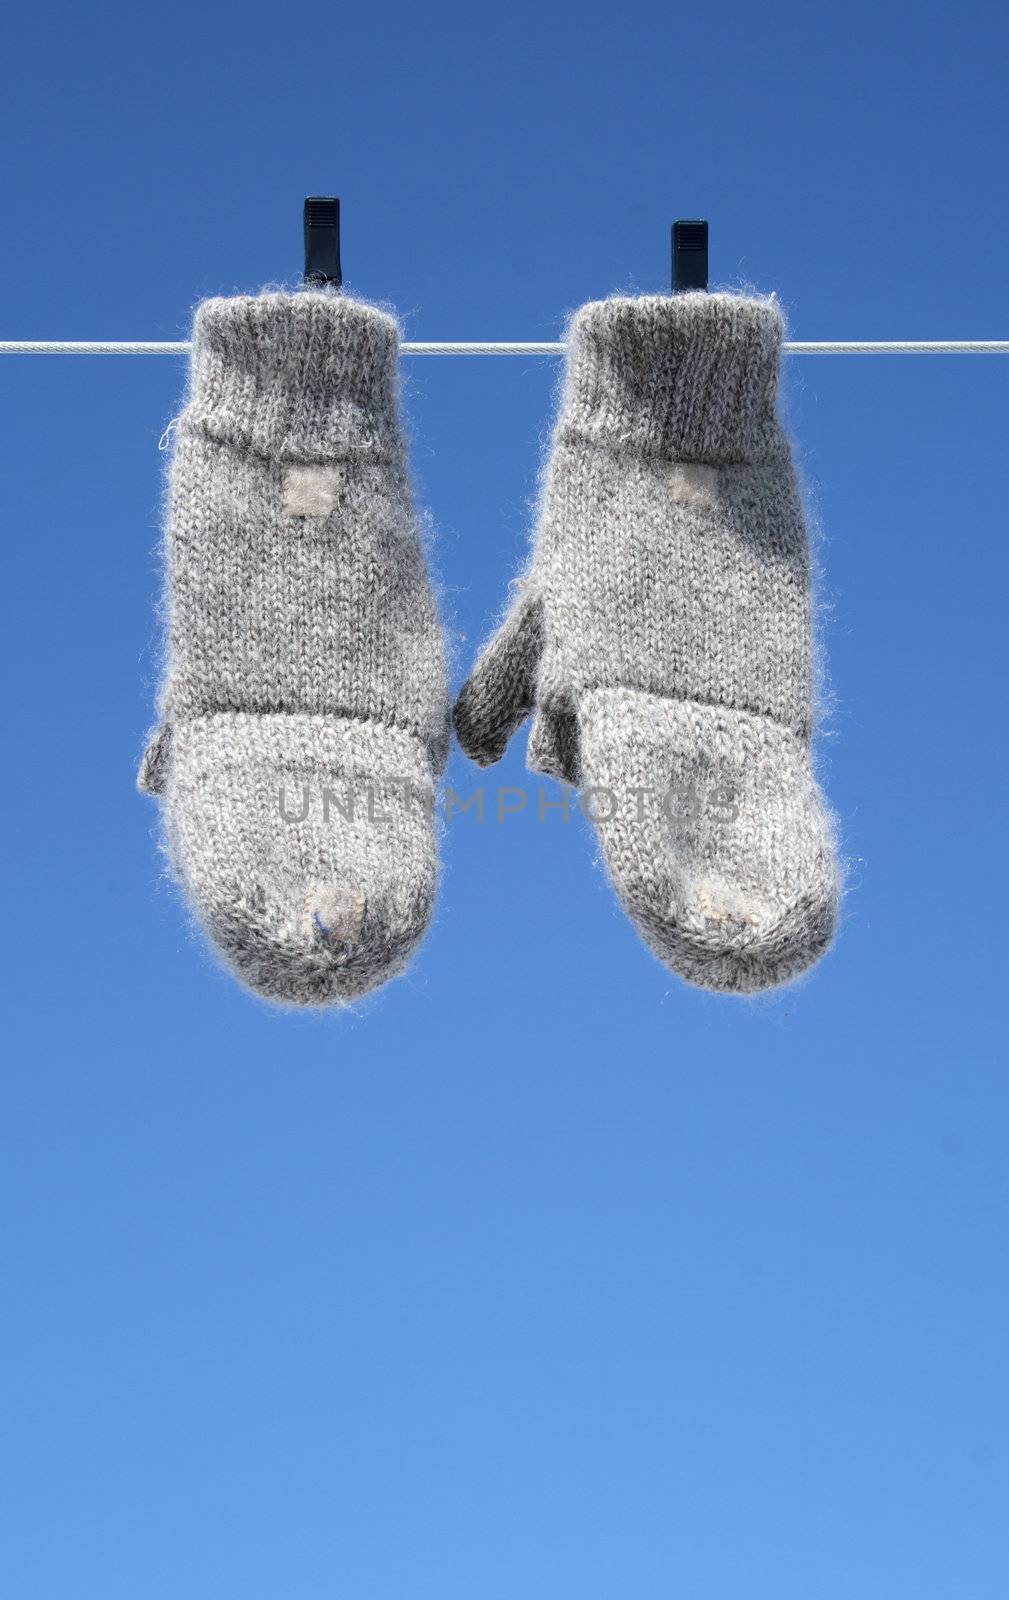 Mittens on the clothes-line hanging to dry � the winter is over